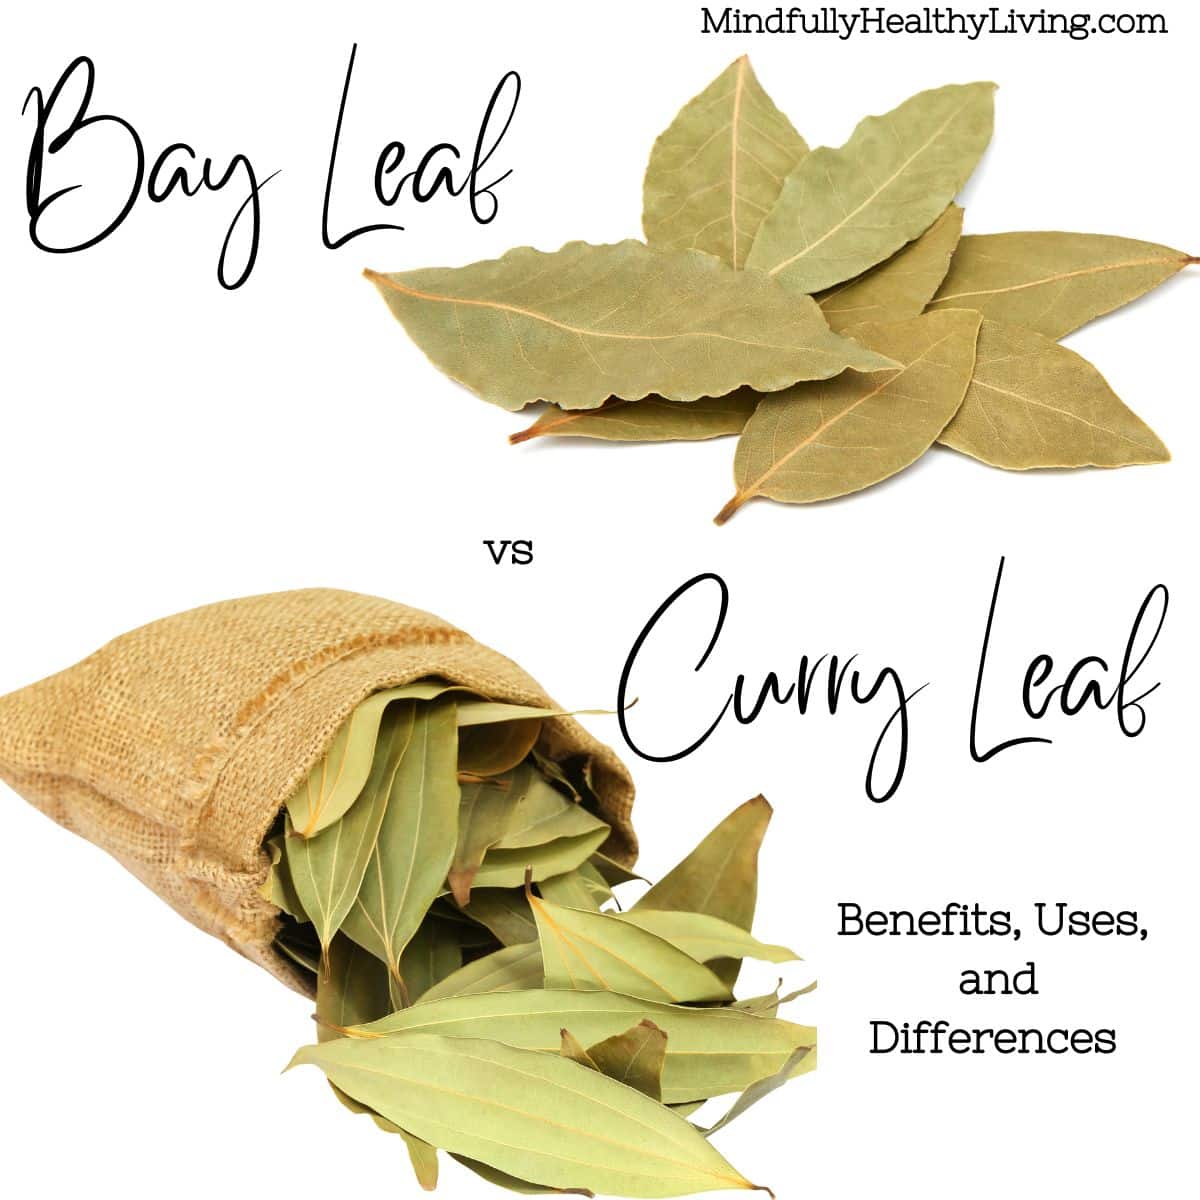 A photo of a pile of dried bay leaves and a satchel of dried curry leaves with text overlay that says Bay leaf vs curry leaf benefits, uses, and differences mindfullyhealthyliving.com